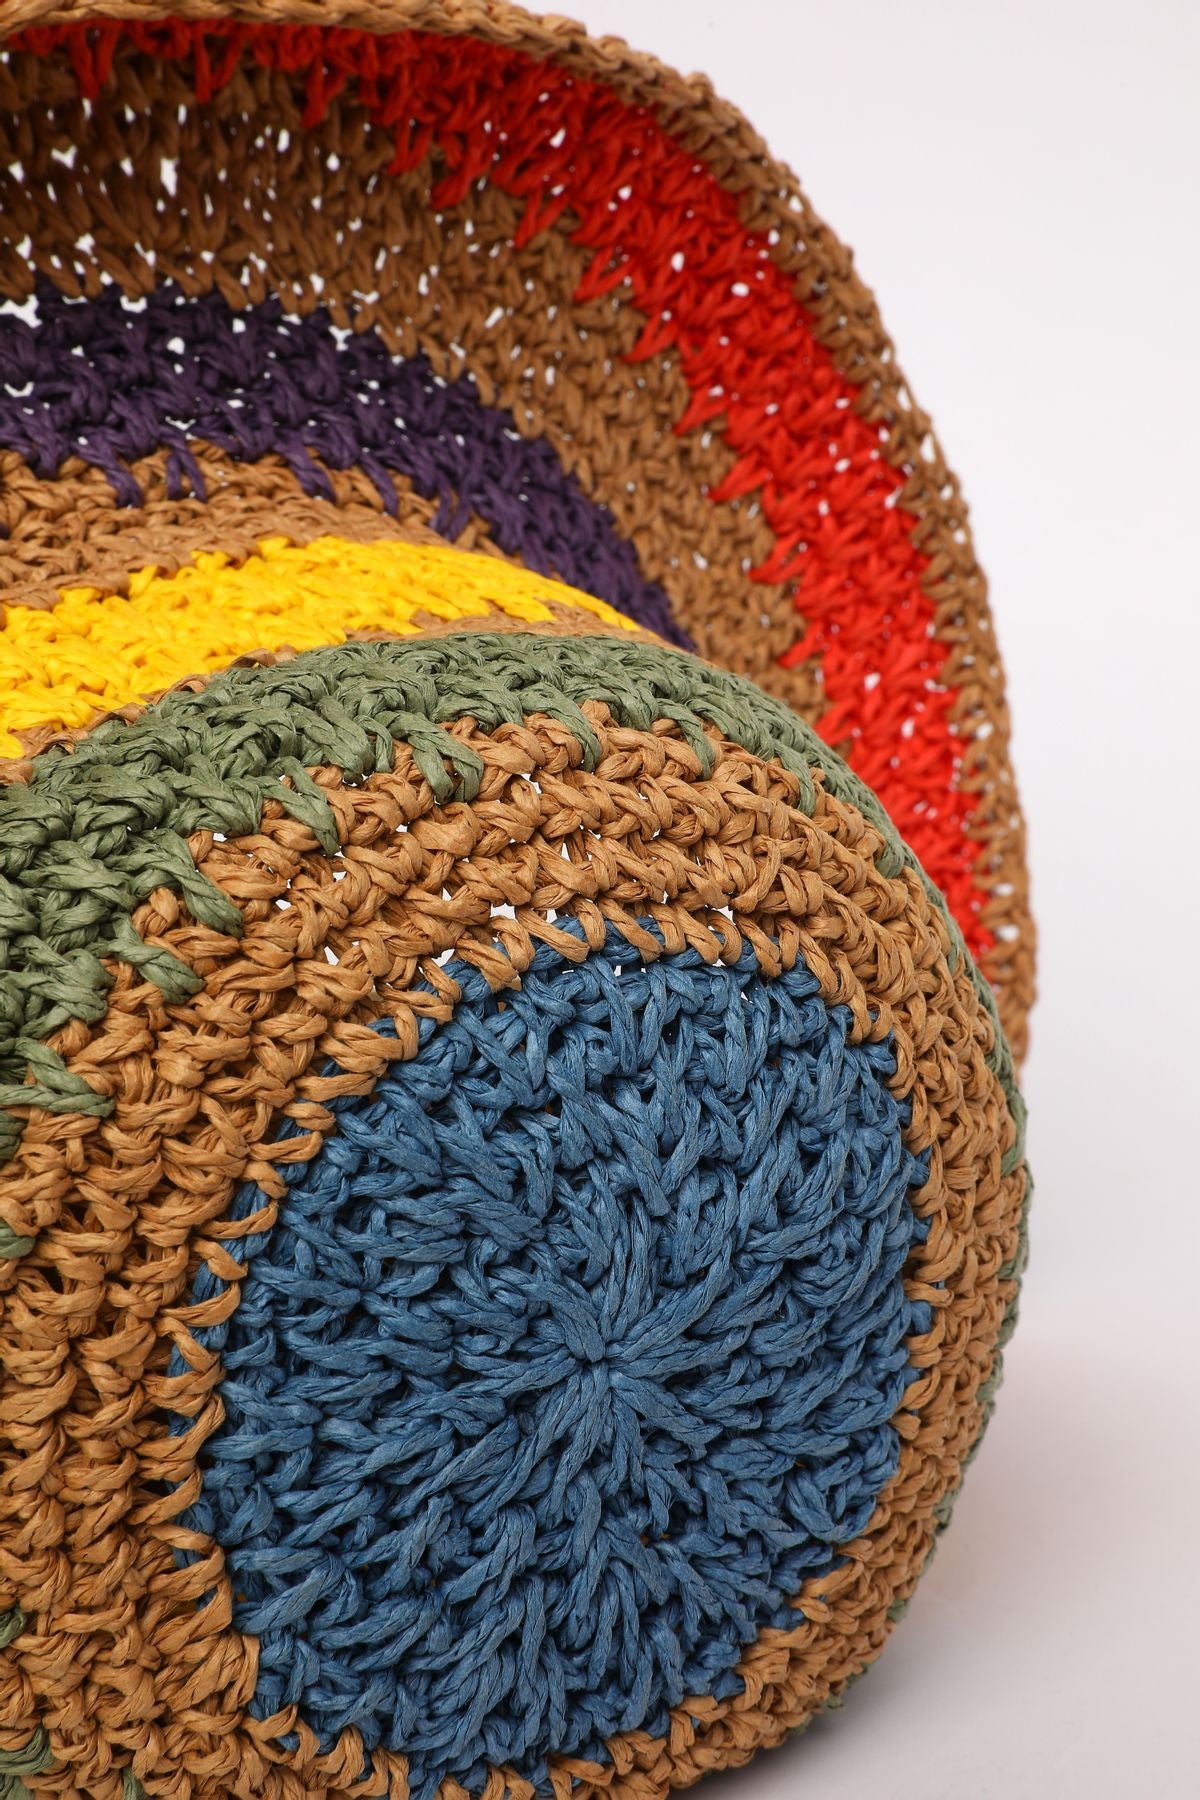 Contrast Colorful Straw Hat